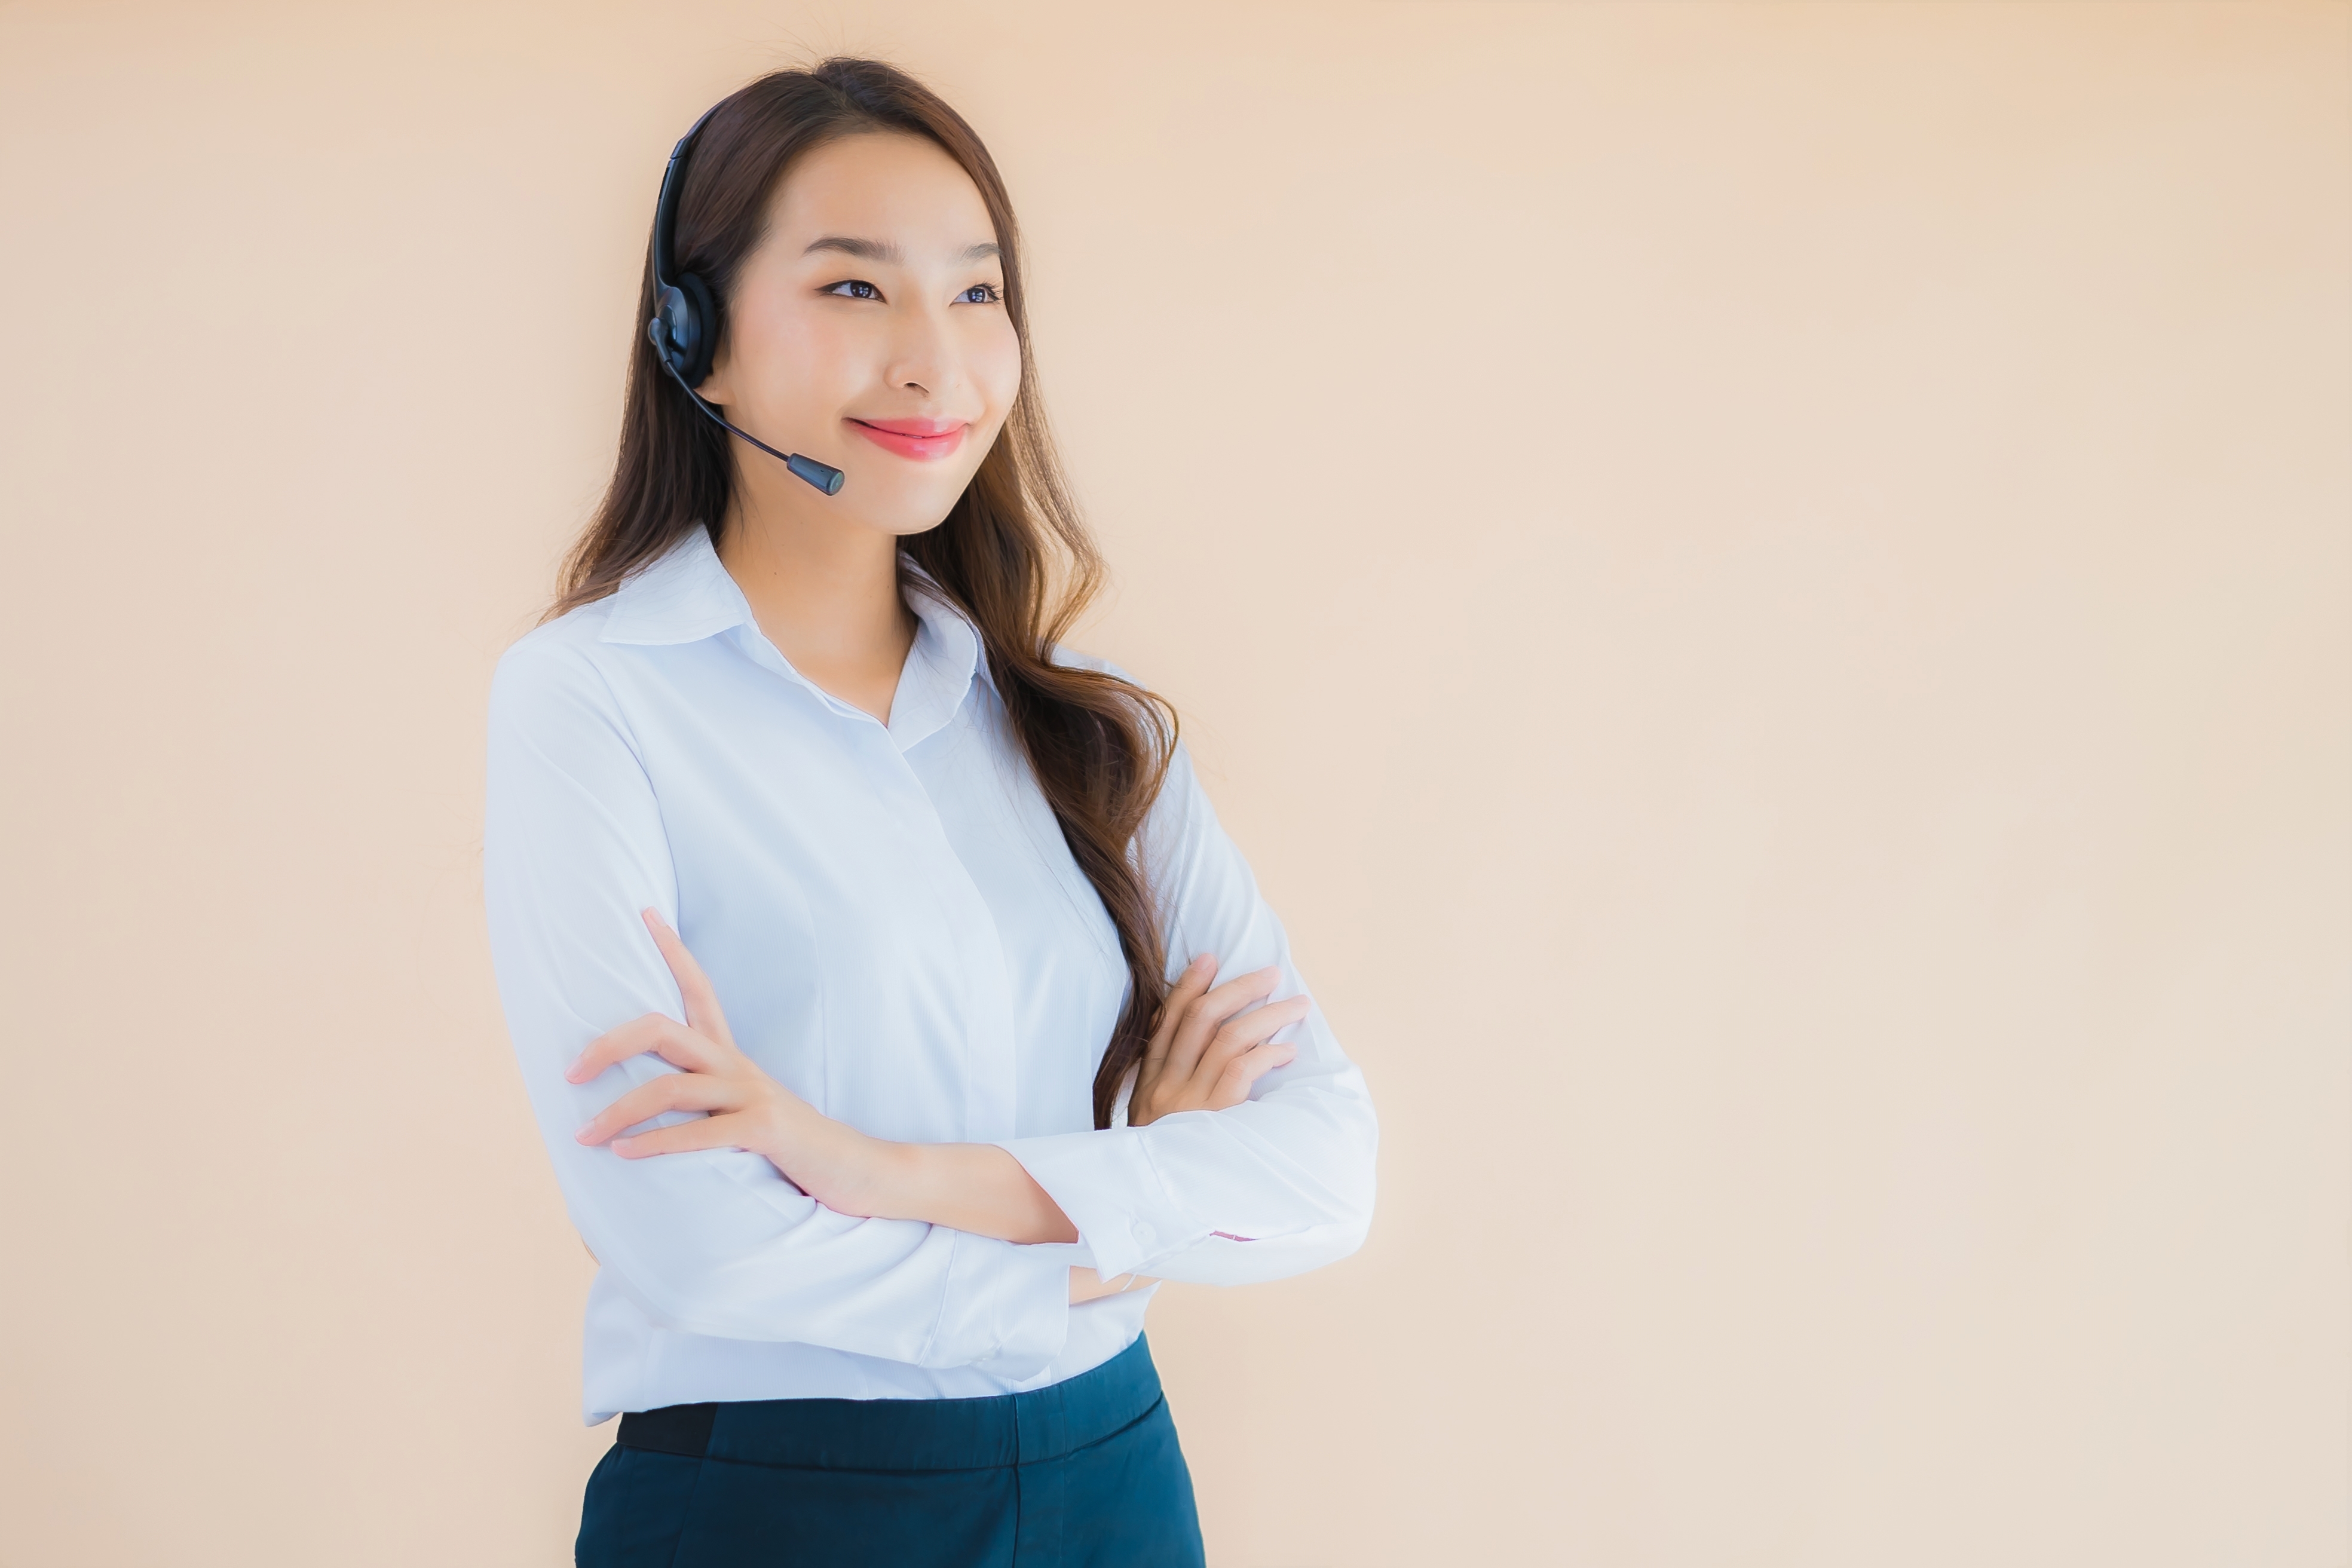 https://img.moneyduck.com/article_attachment/1679393690-portrait-beautiful-young-asian-business-woman-with-headphone-call-center.jpg